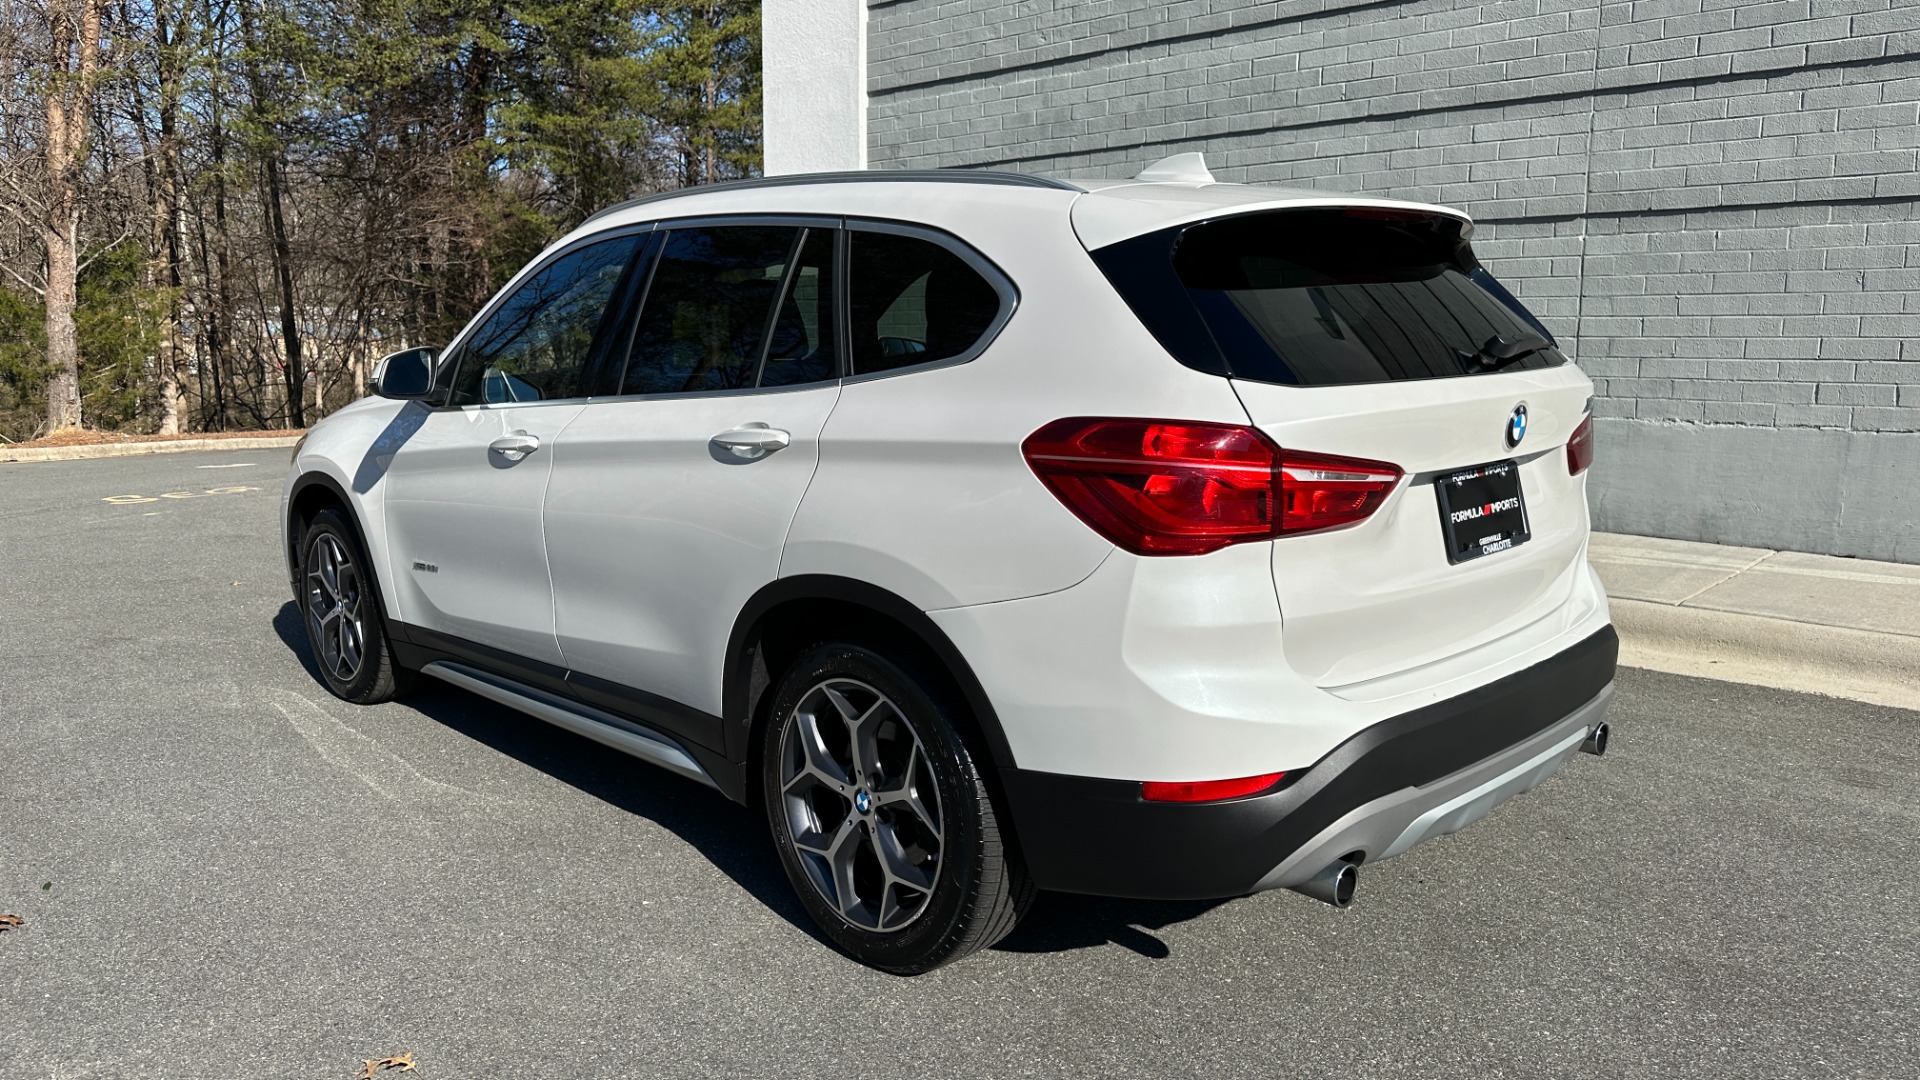 Used 2018 BMW X1 xDrive28i / DAKOTA LEATHER INTERIOR / HEATED STEERING / HEATED SEATS / NAVI for sale Sold at Formula Imports in Charlotte NC 28227 4